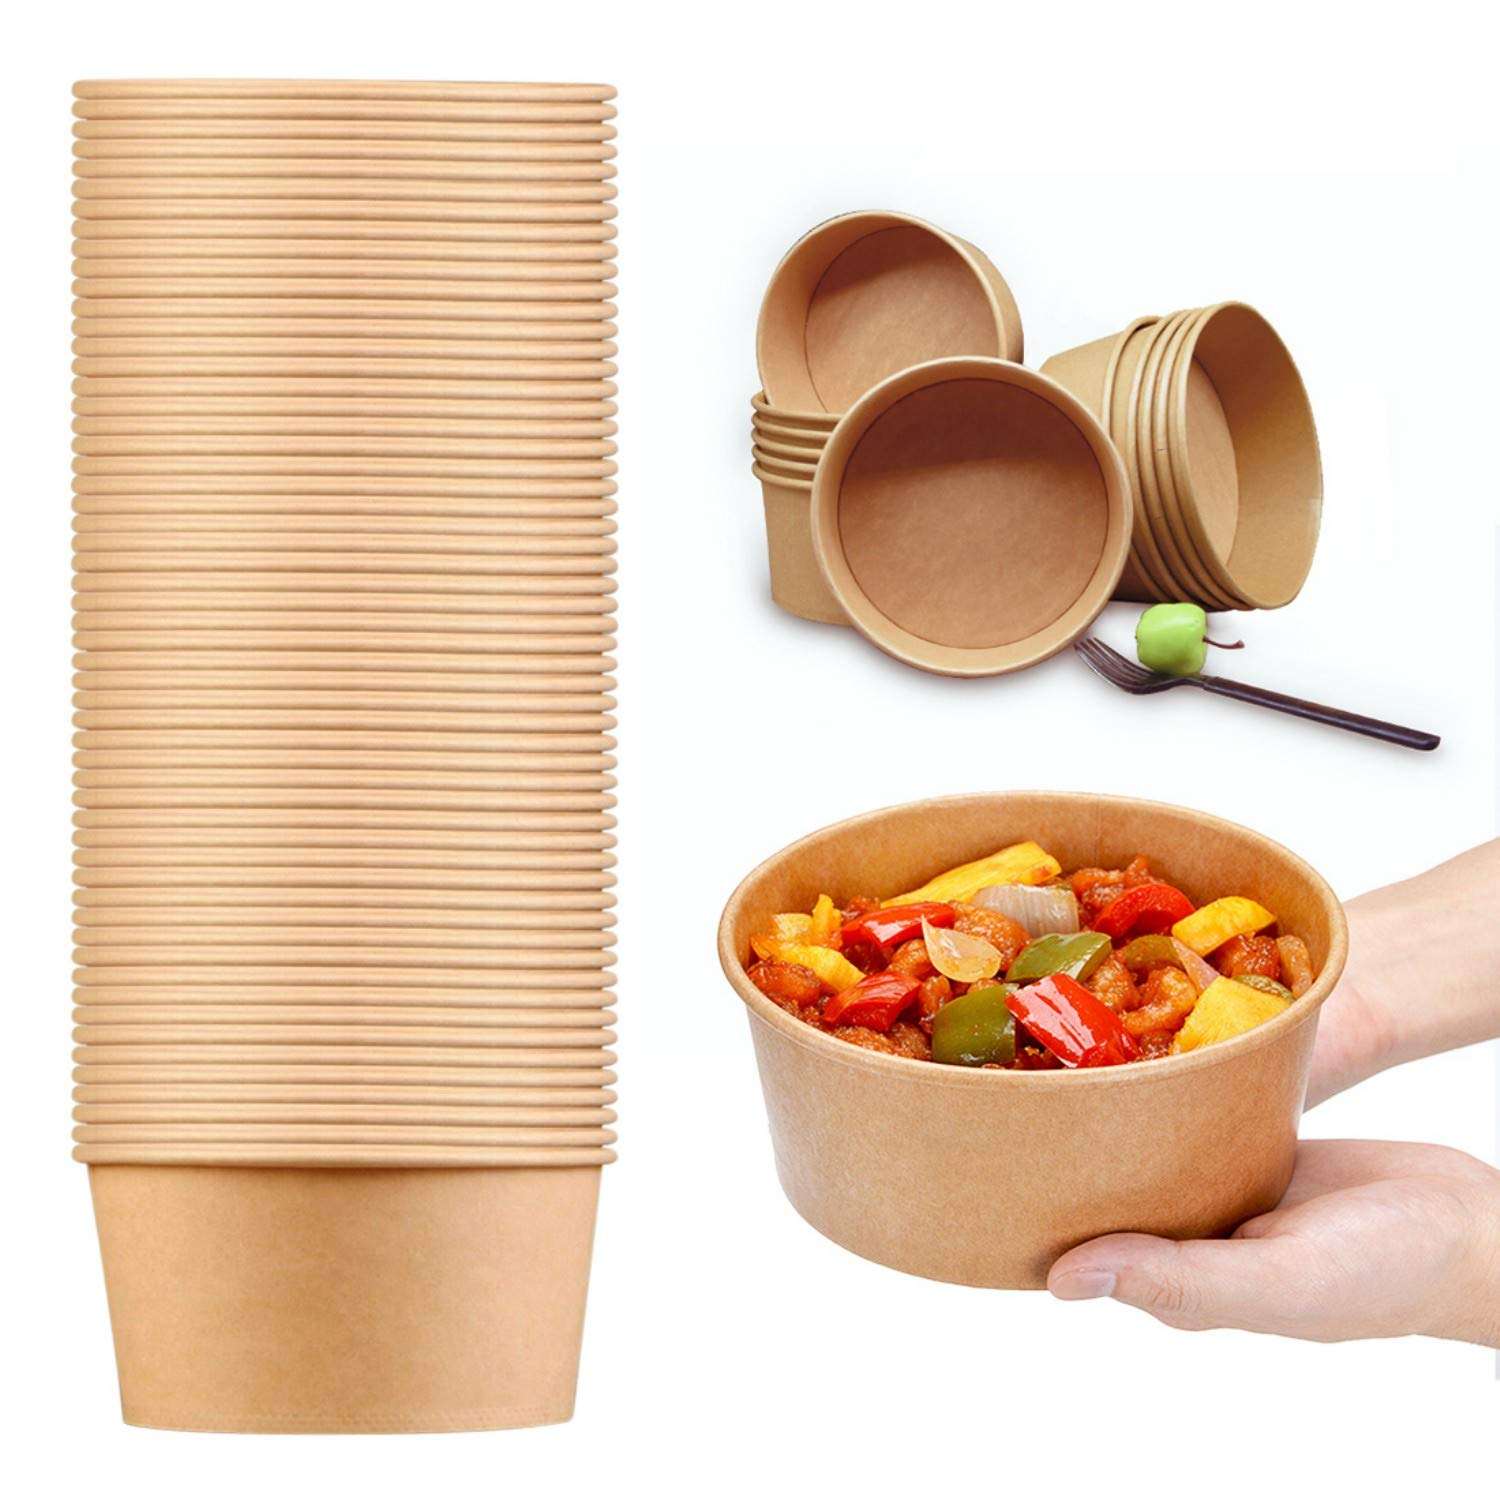 Disposable manufacturer kraft paper cup container salad bowls soup paper bowl with lid - 副本 - 副本